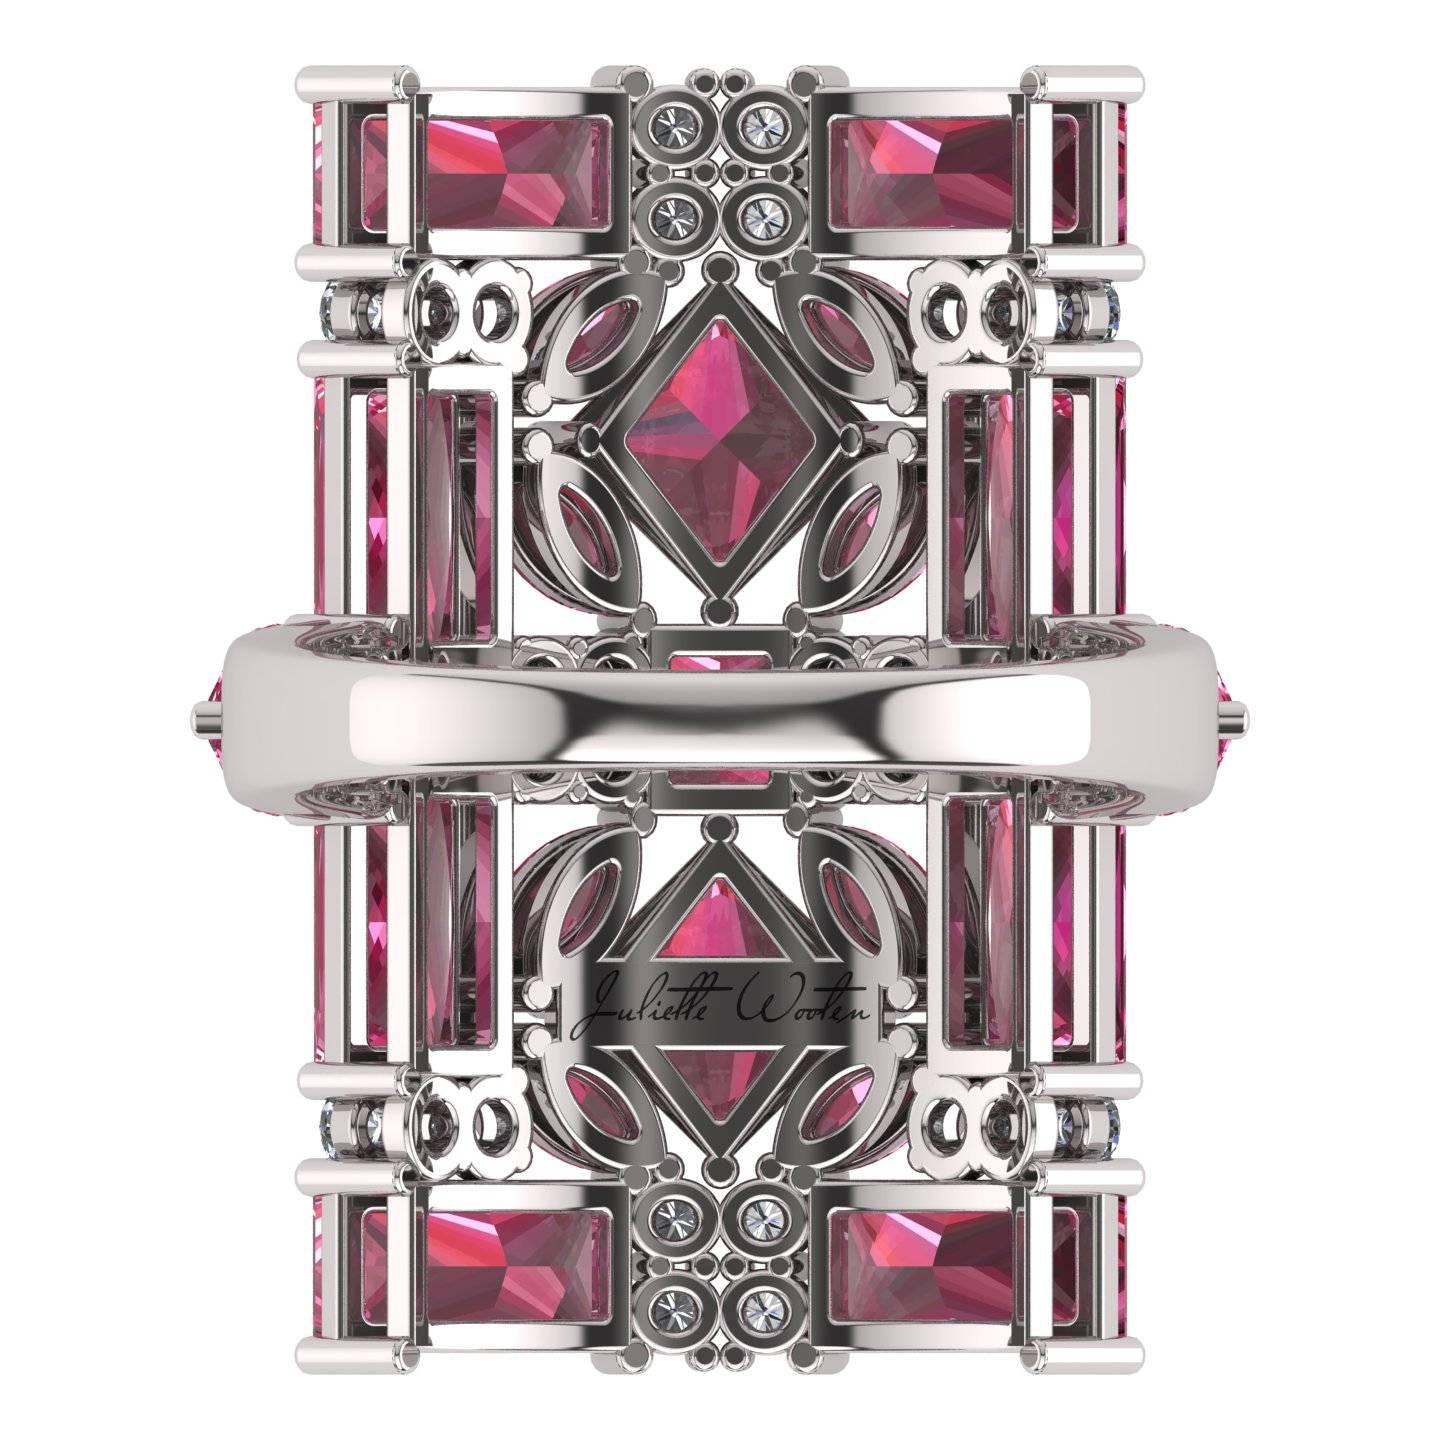 INTRODUCING NEW COLLECTION LES BAGUETTES

Pink Tourmaline has a beautiful loving energy and carries a strong feminine  vibration. It is symbolizing life, kindness, feelings of joy, hope and comfort. Discover the natural beauty of this mysterious